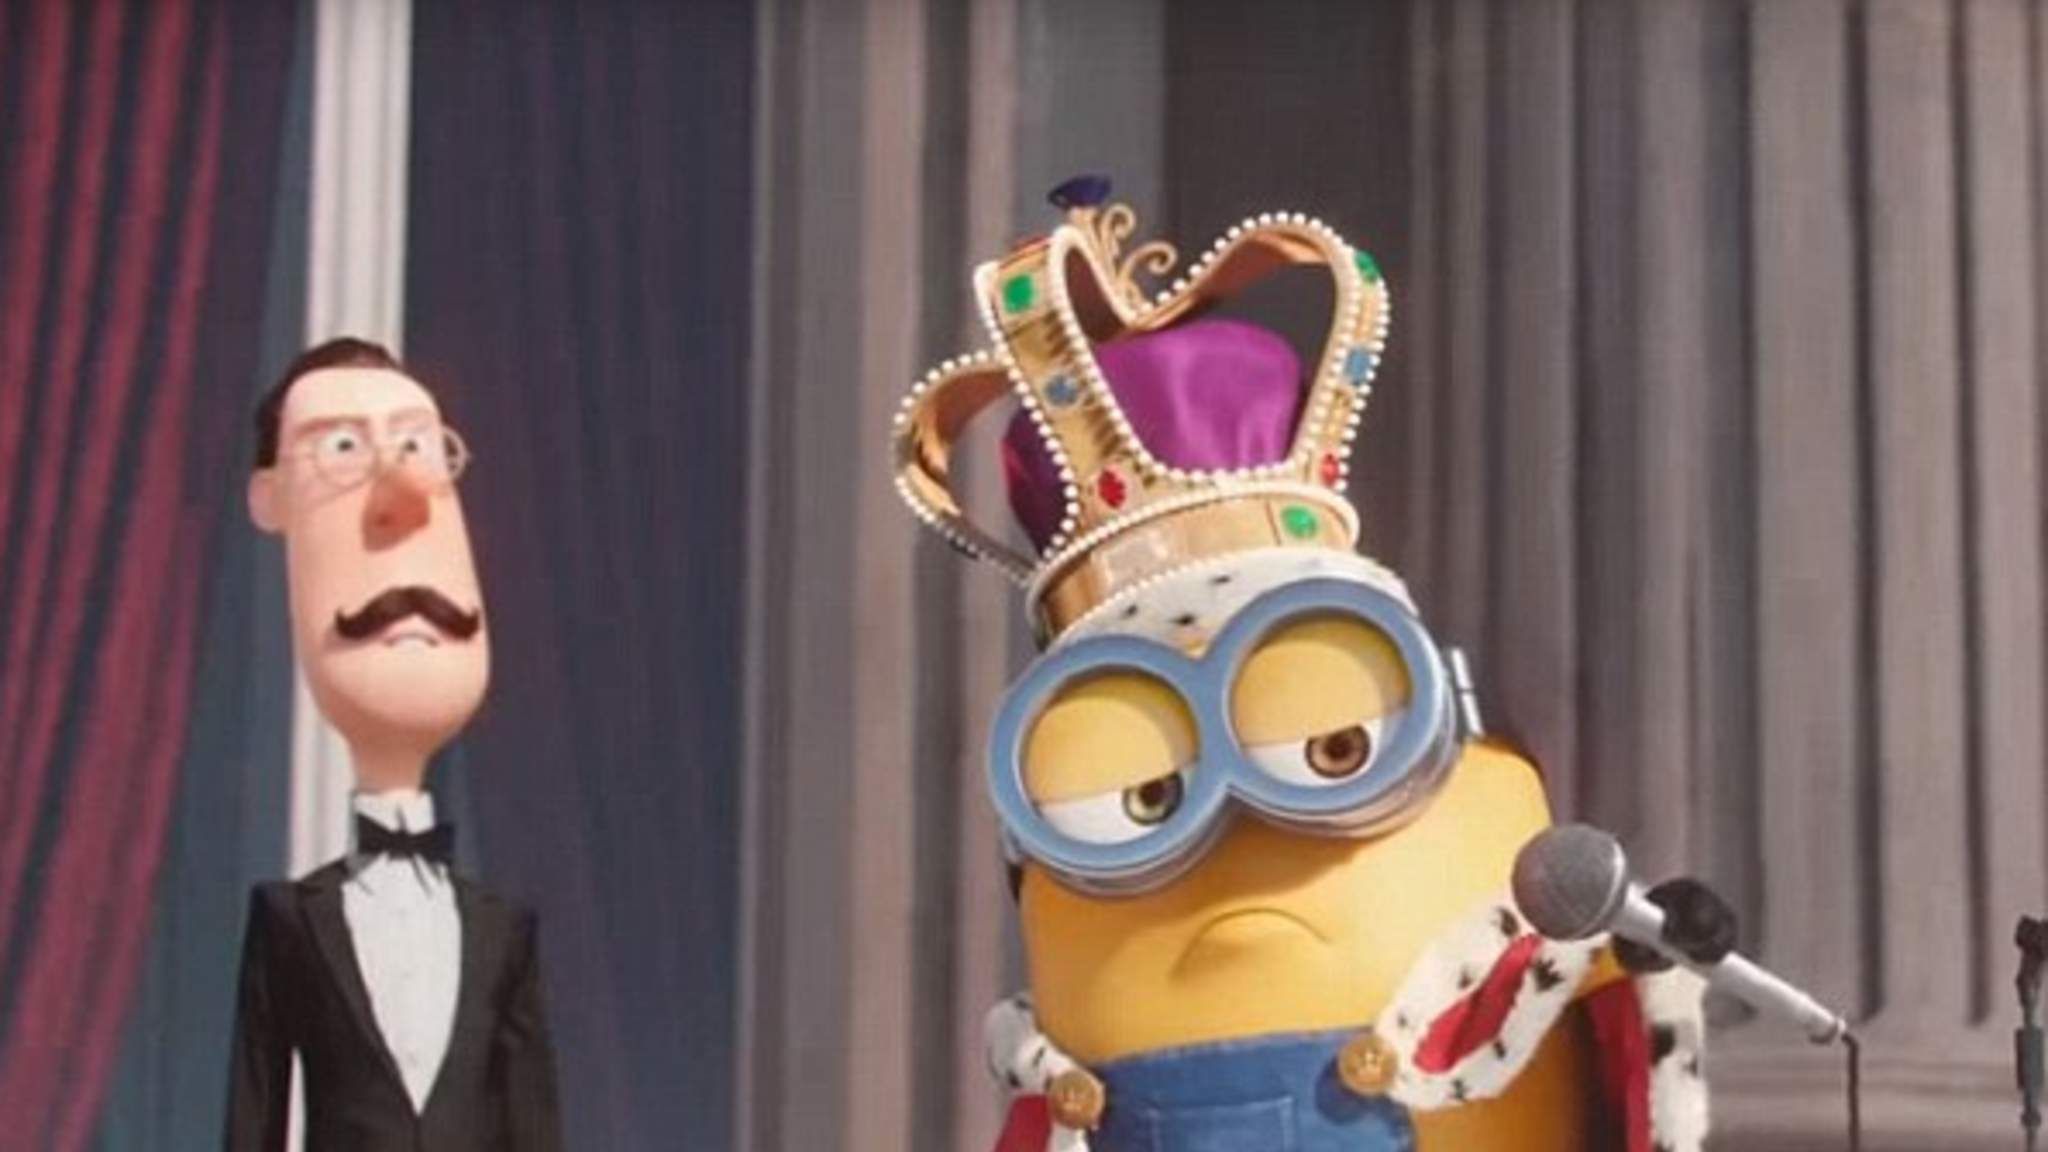 By the Numbers: How a TikTok meme boosted 'Minions' - Good Morning America